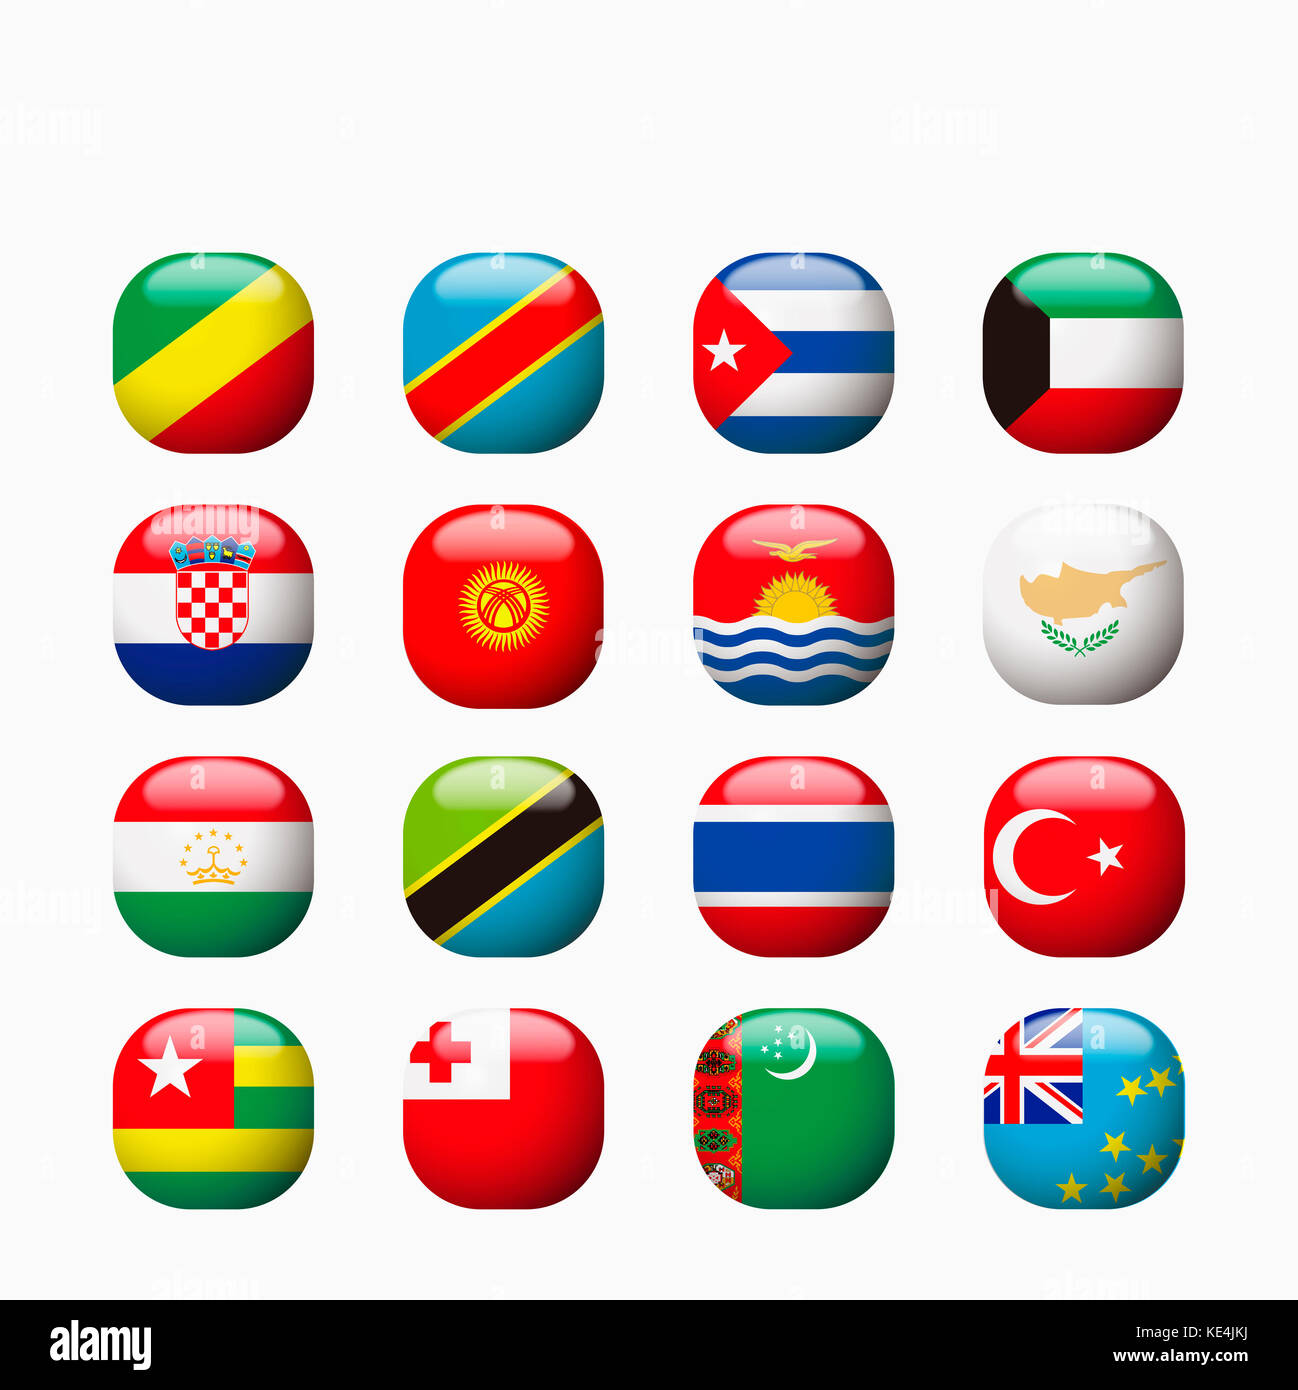 Icon set of various national flags Stock Photo